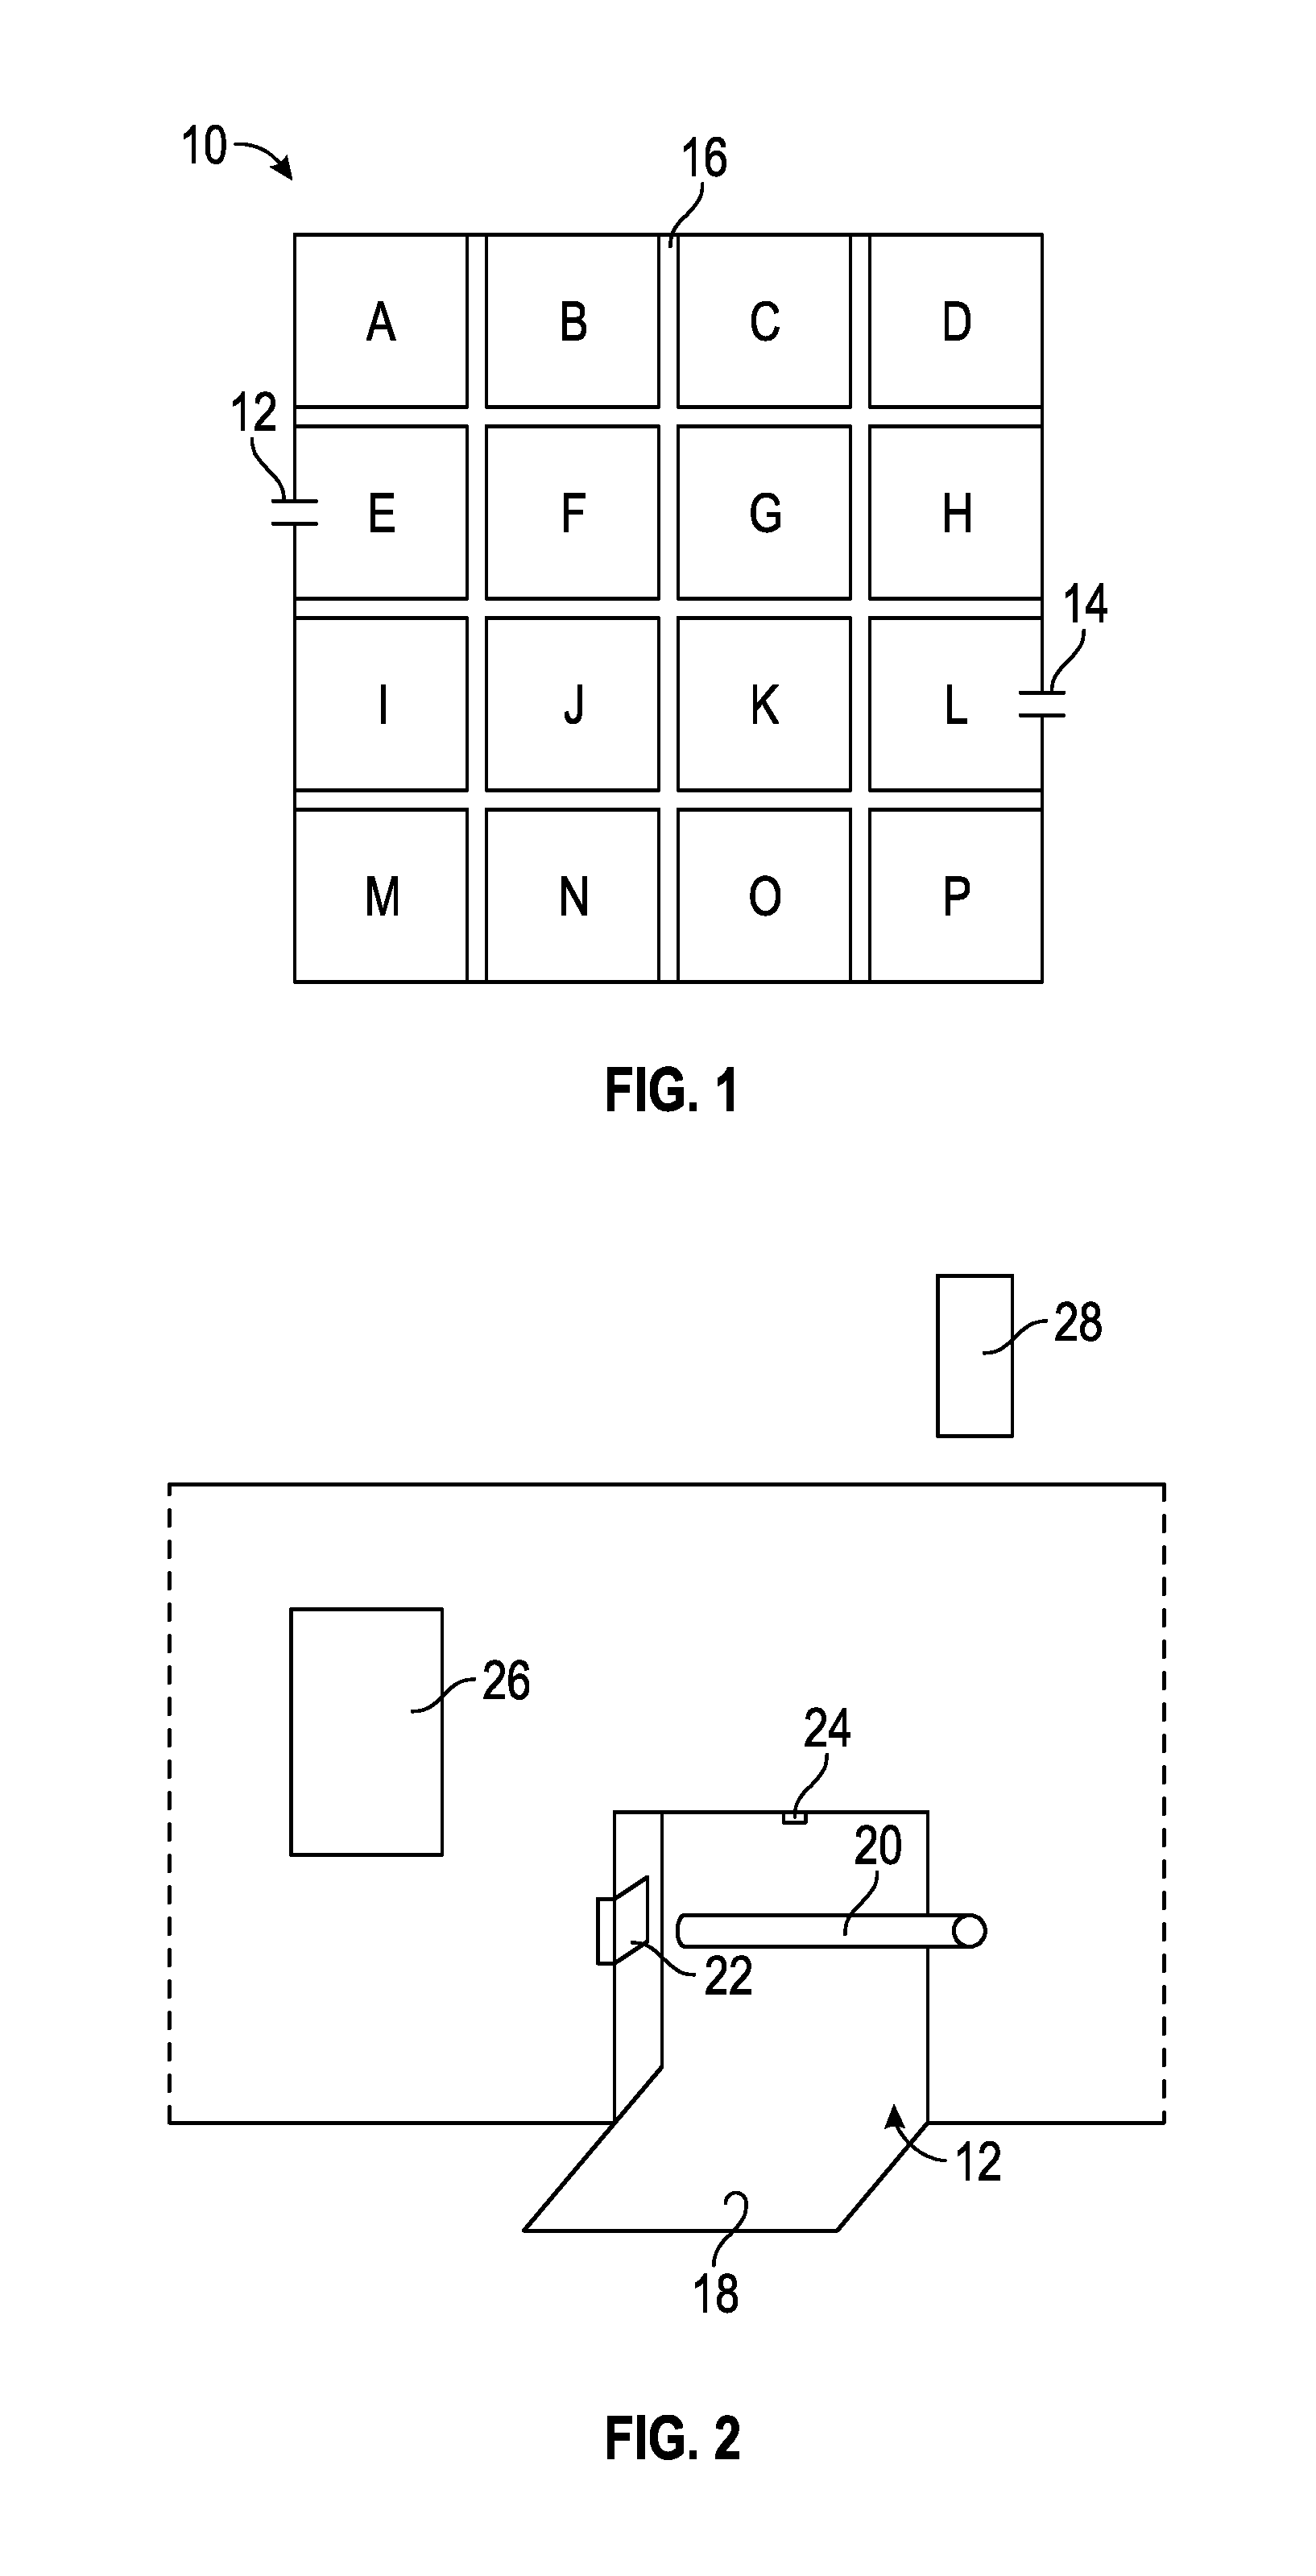 Method and System for Dynamic Parking Selection, Transaction, Management and Data Provision